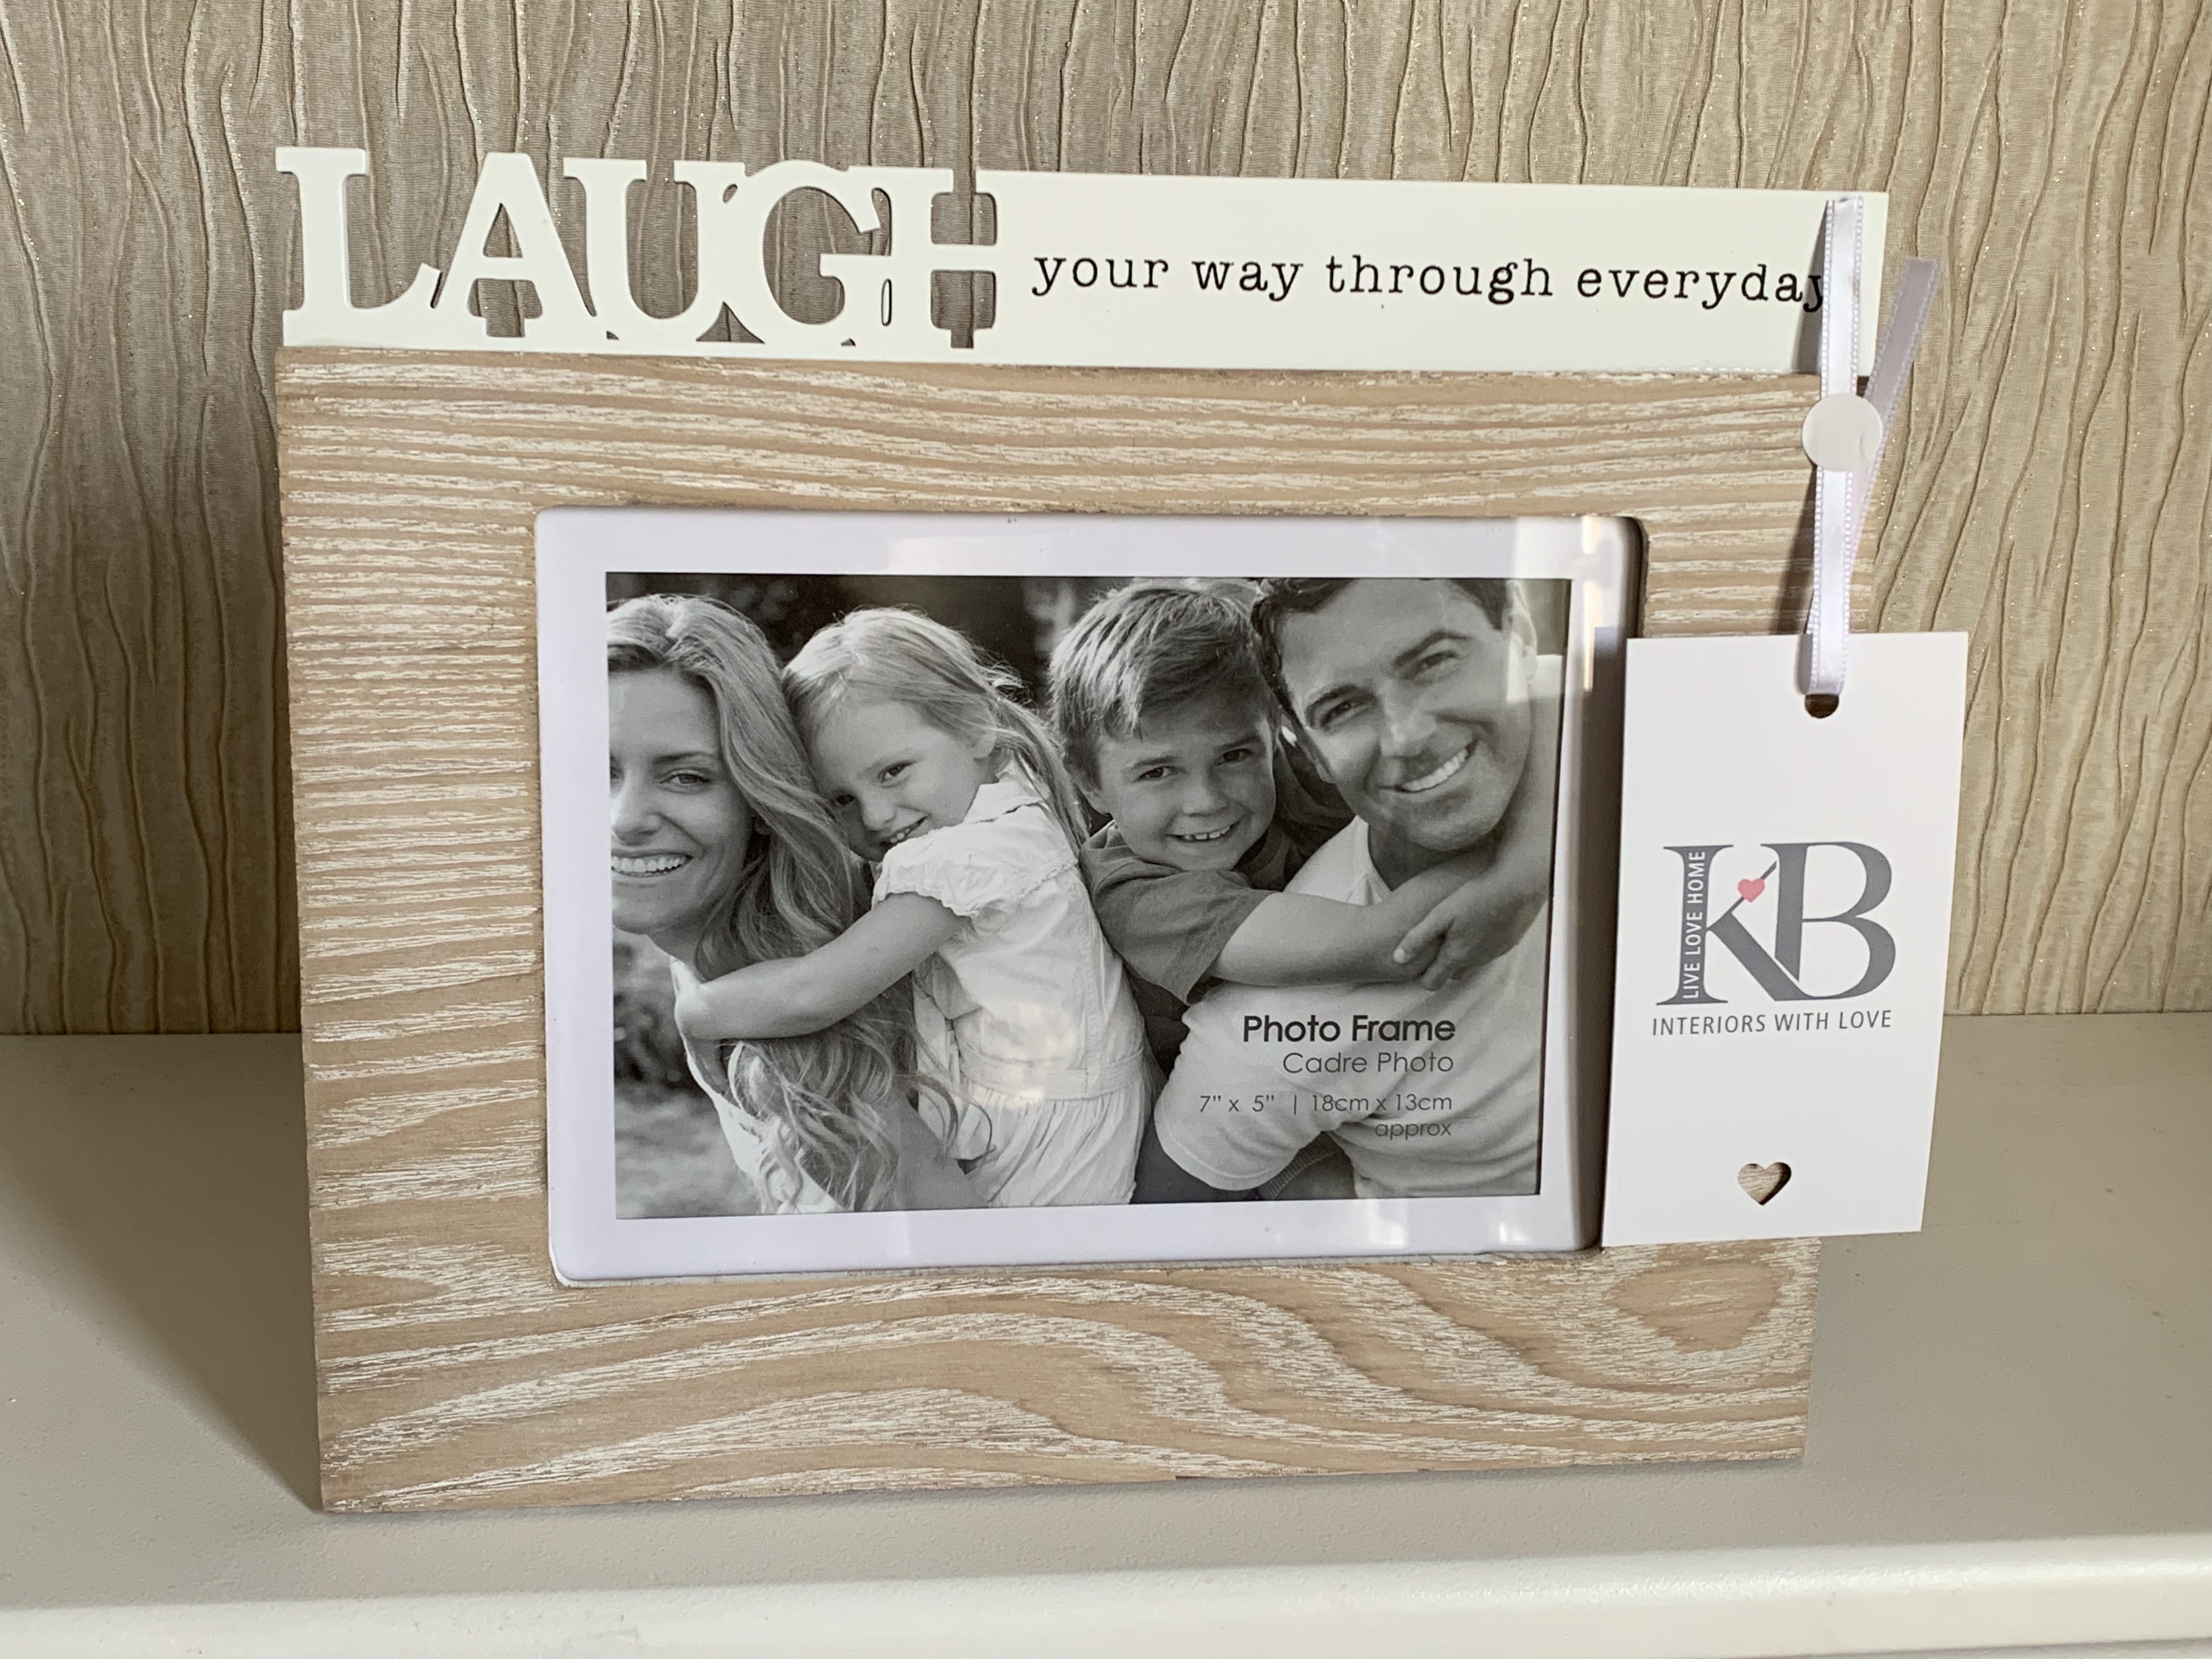 Laugh Picture Frame